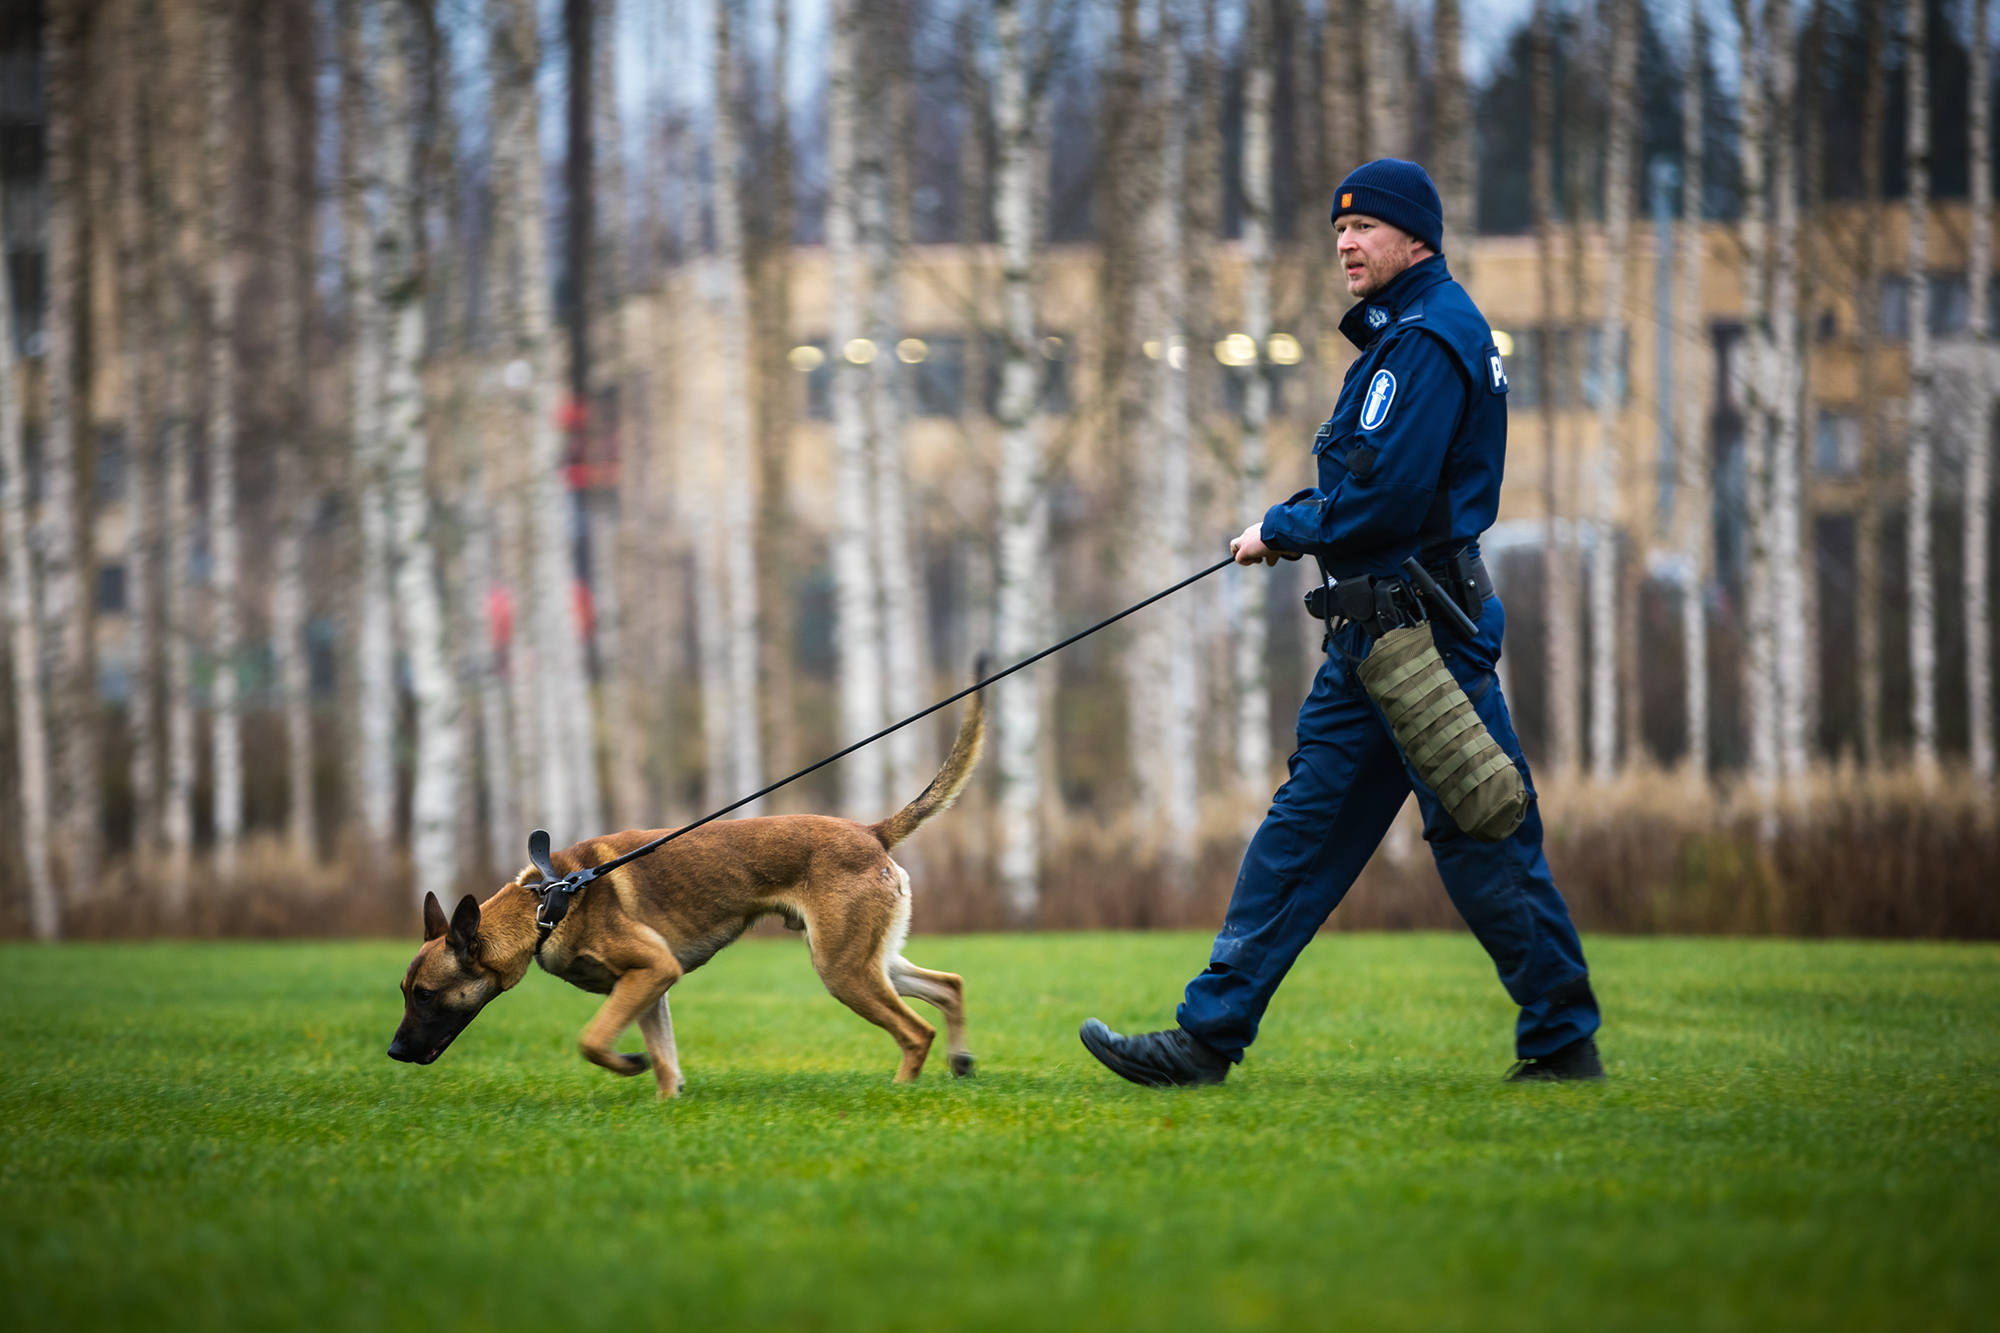 A police dog on the grass, pulling on the lead. The handler follows on behind.